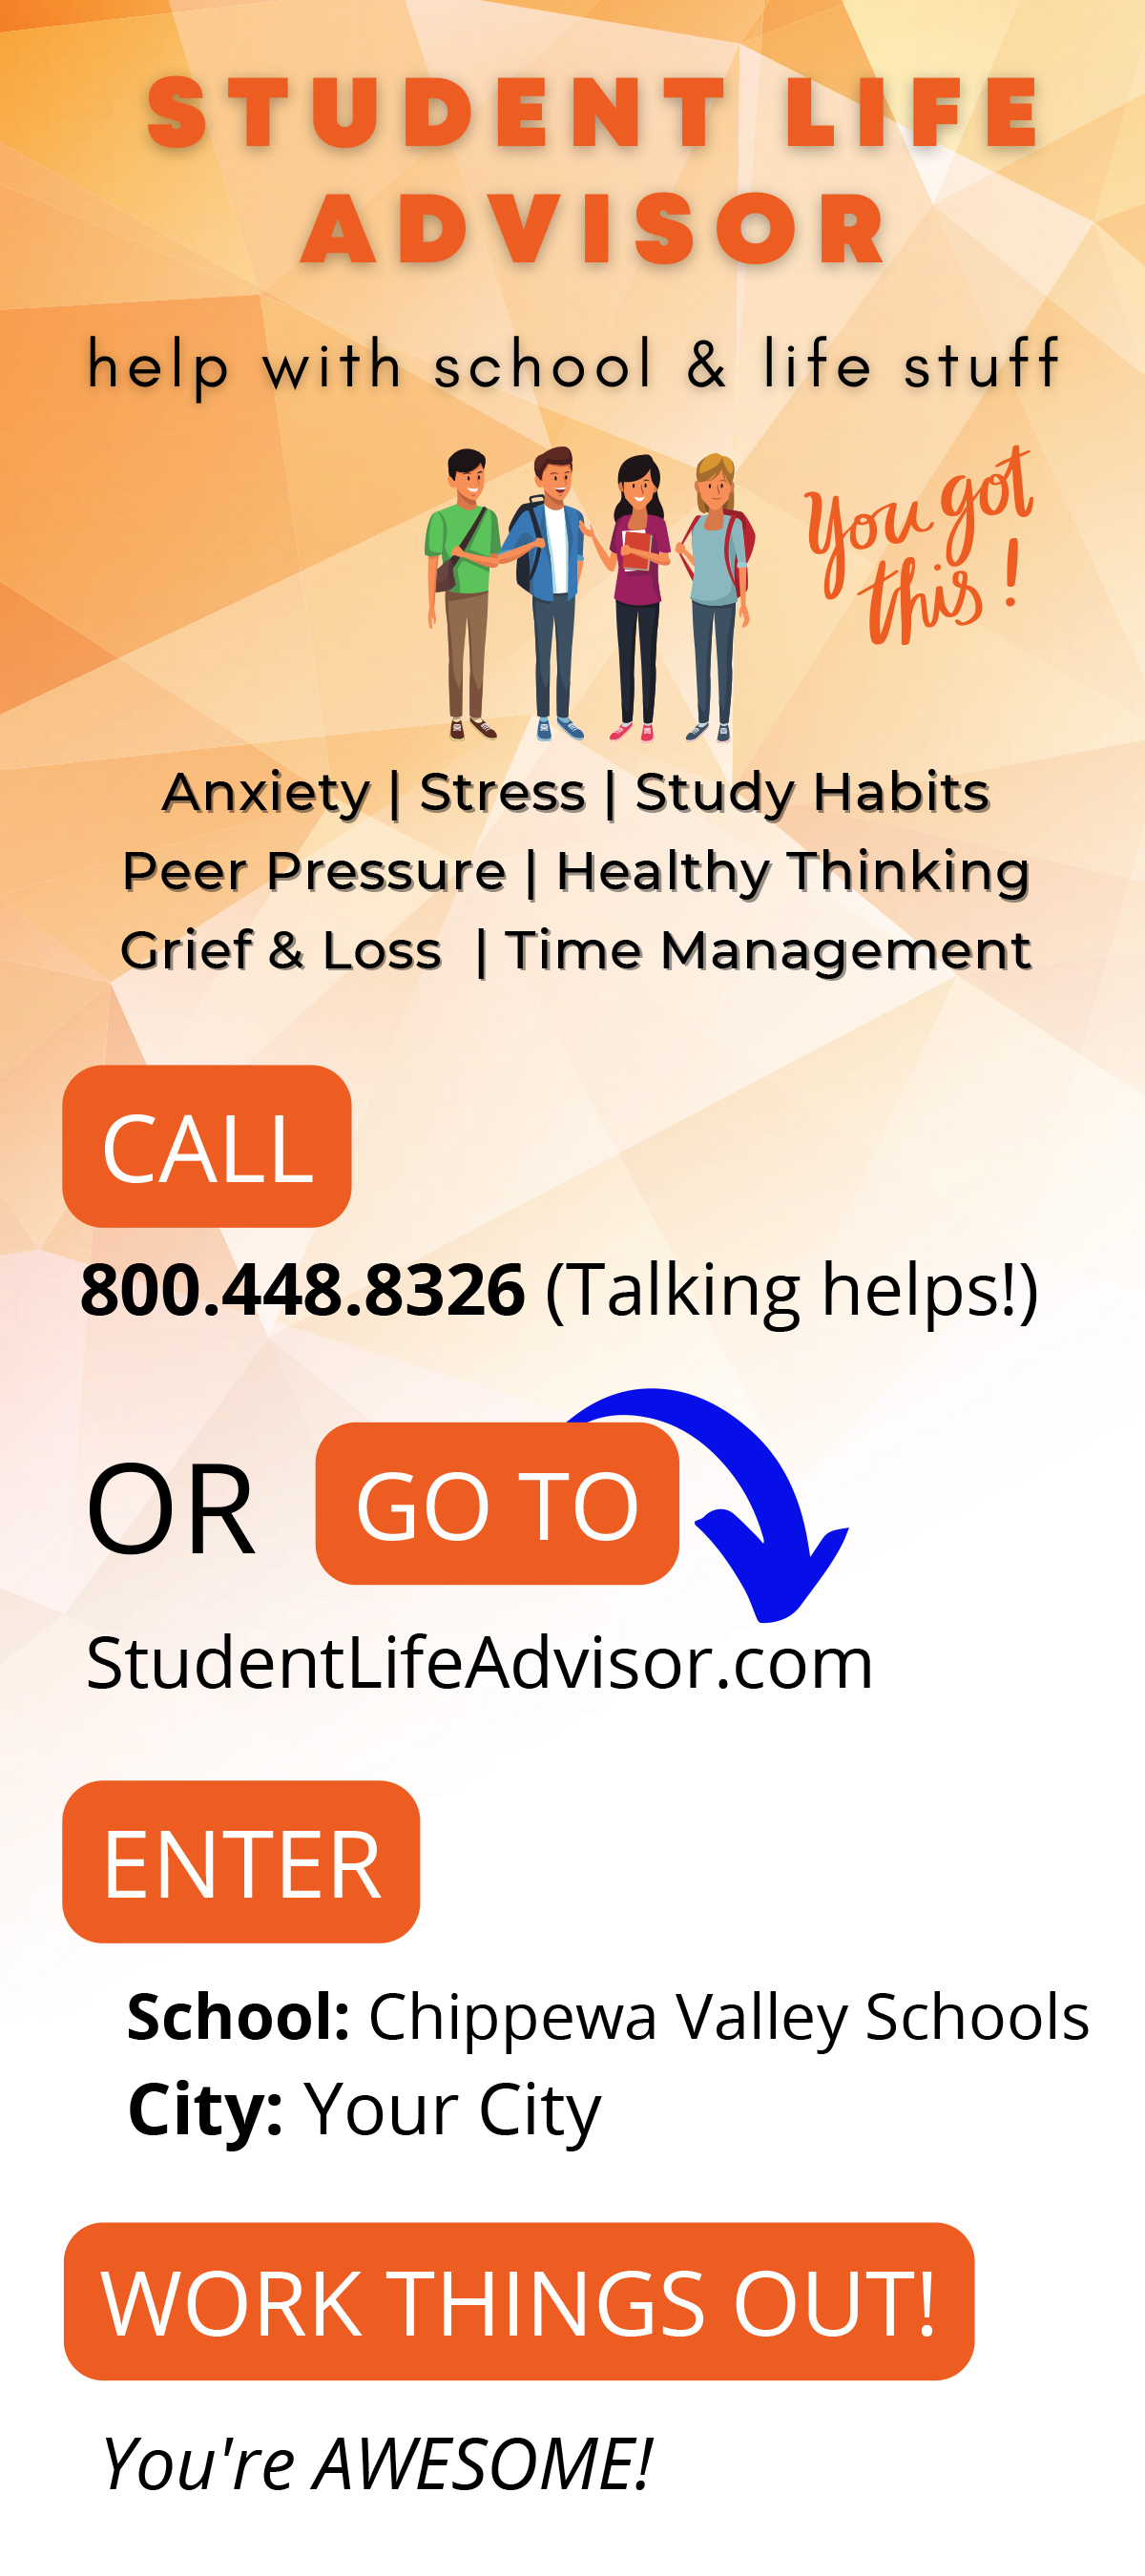 Student Life Advisor card: Help with school and life stuff.